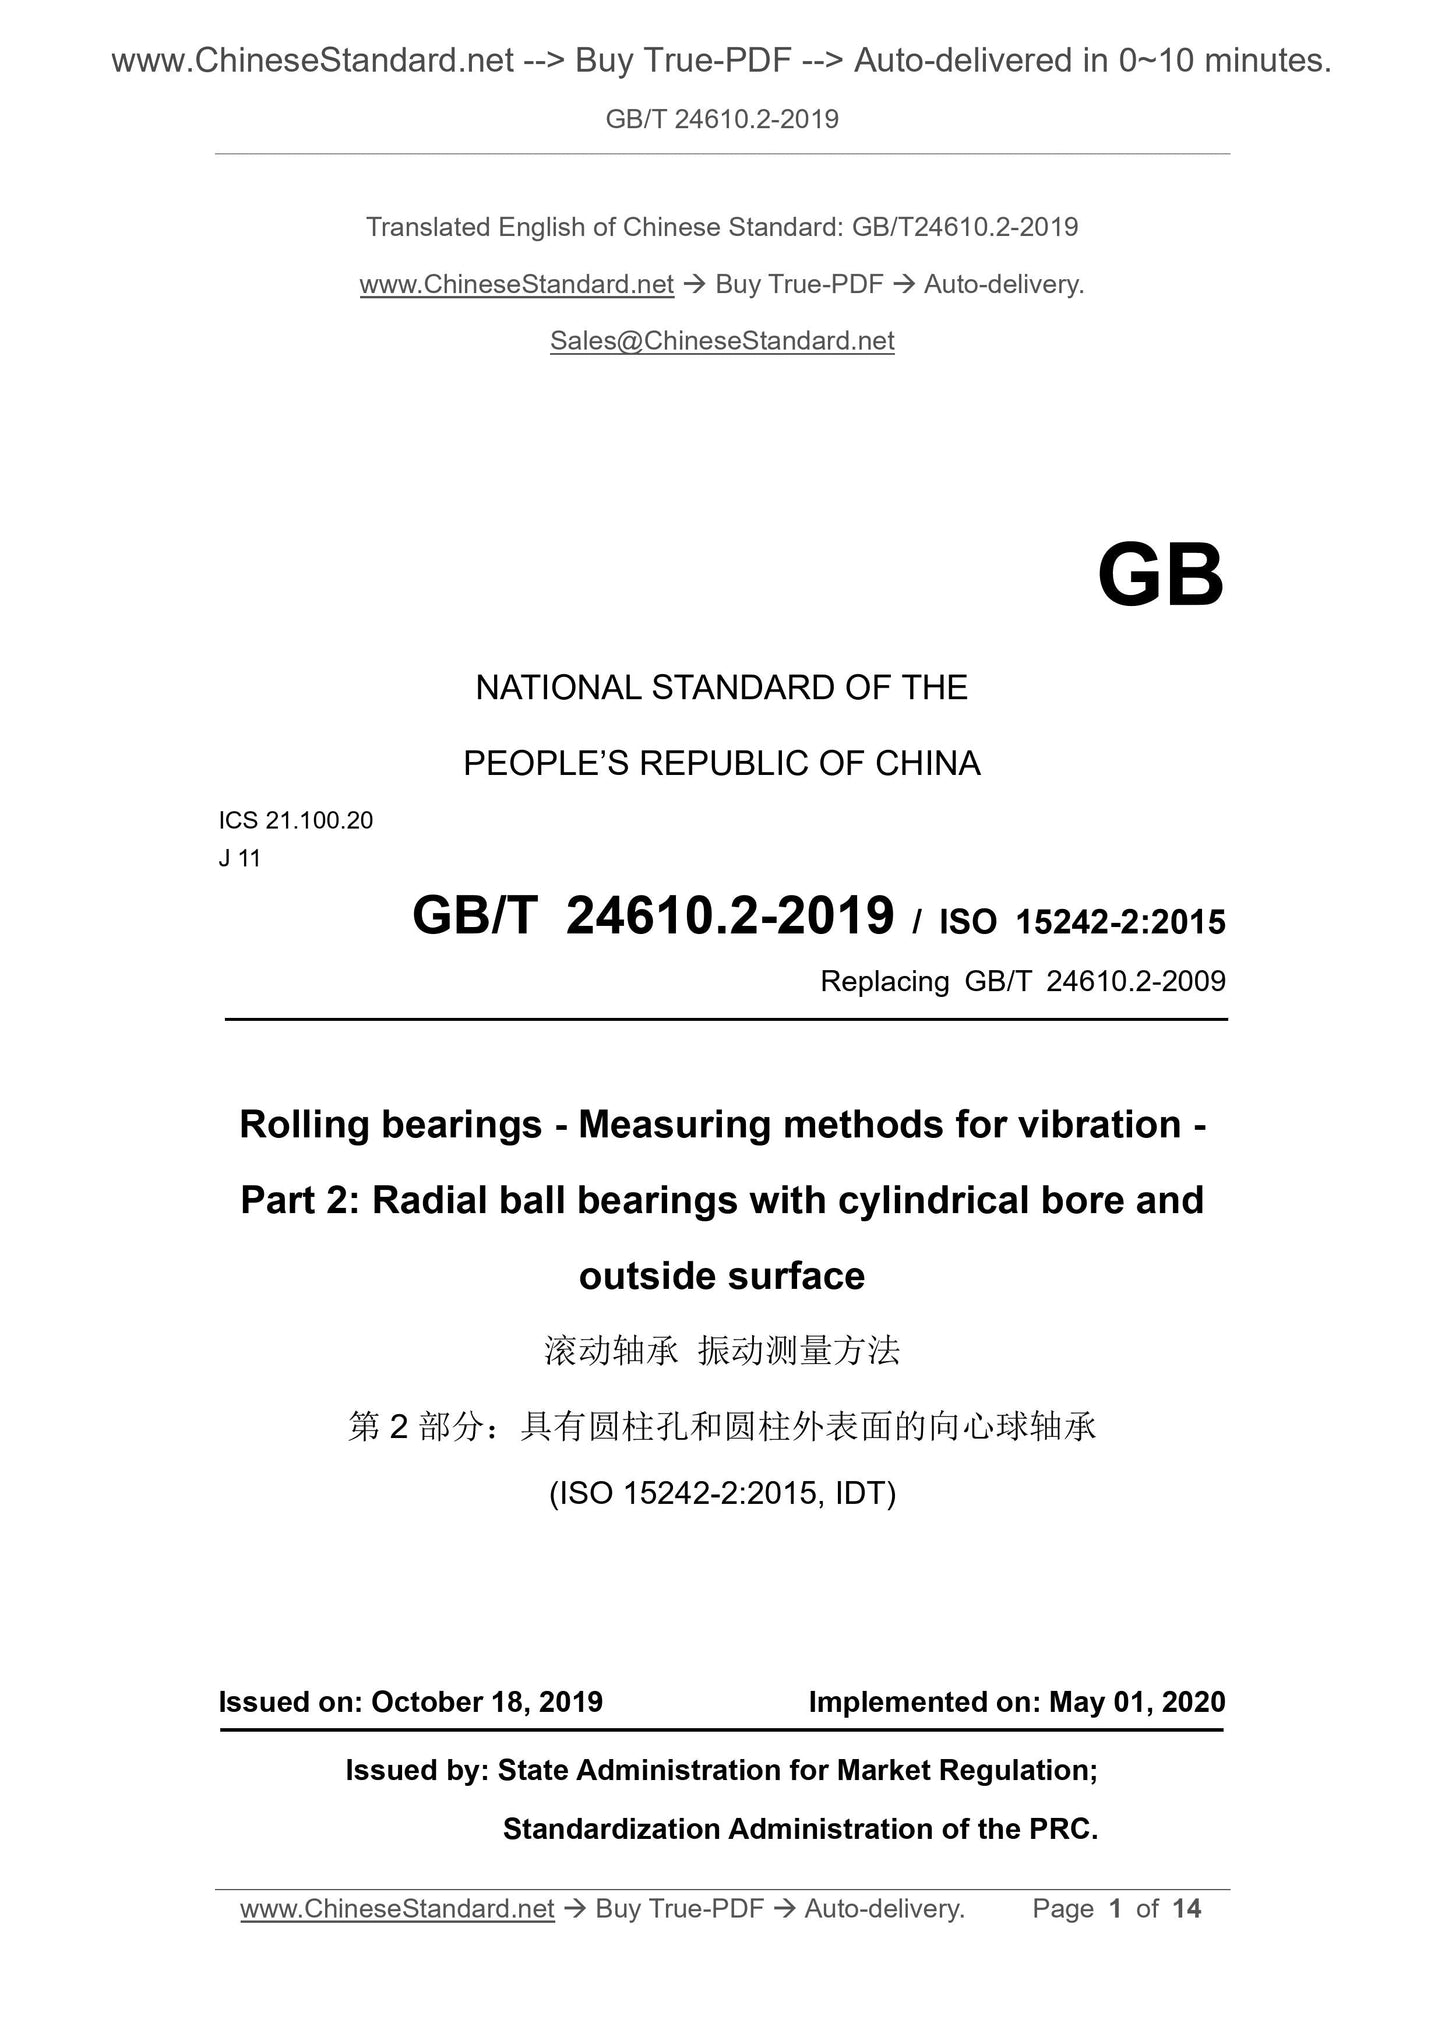 GB/T 24610.2-2019 Page 1